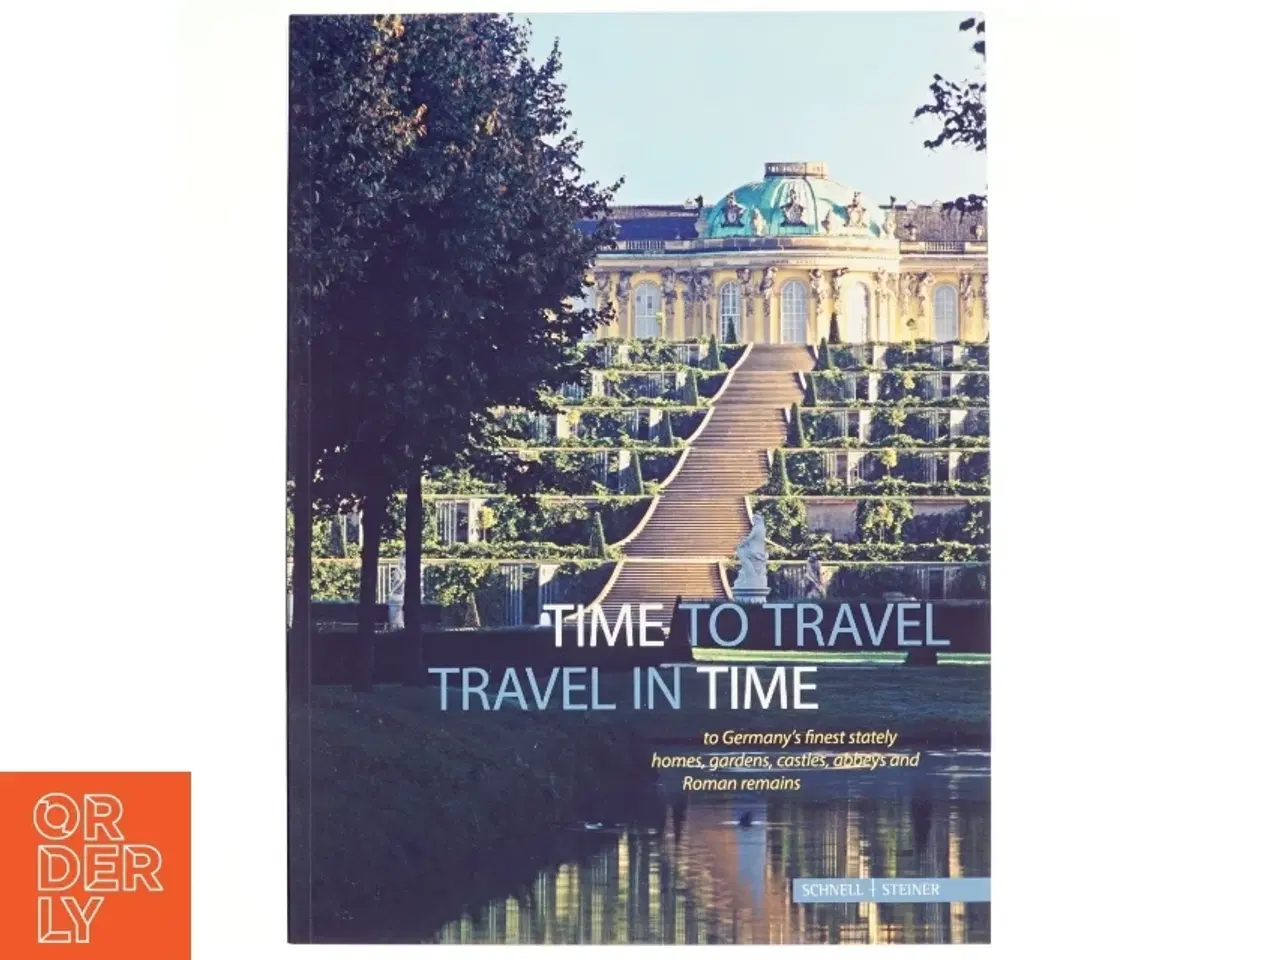 Billede 1 - Time to Travel, Travel in Time to Germany's Finest Stately Homes, Gardens, Castles, Abbeys and Roman Remains af Anneliese Almasan (Bog)